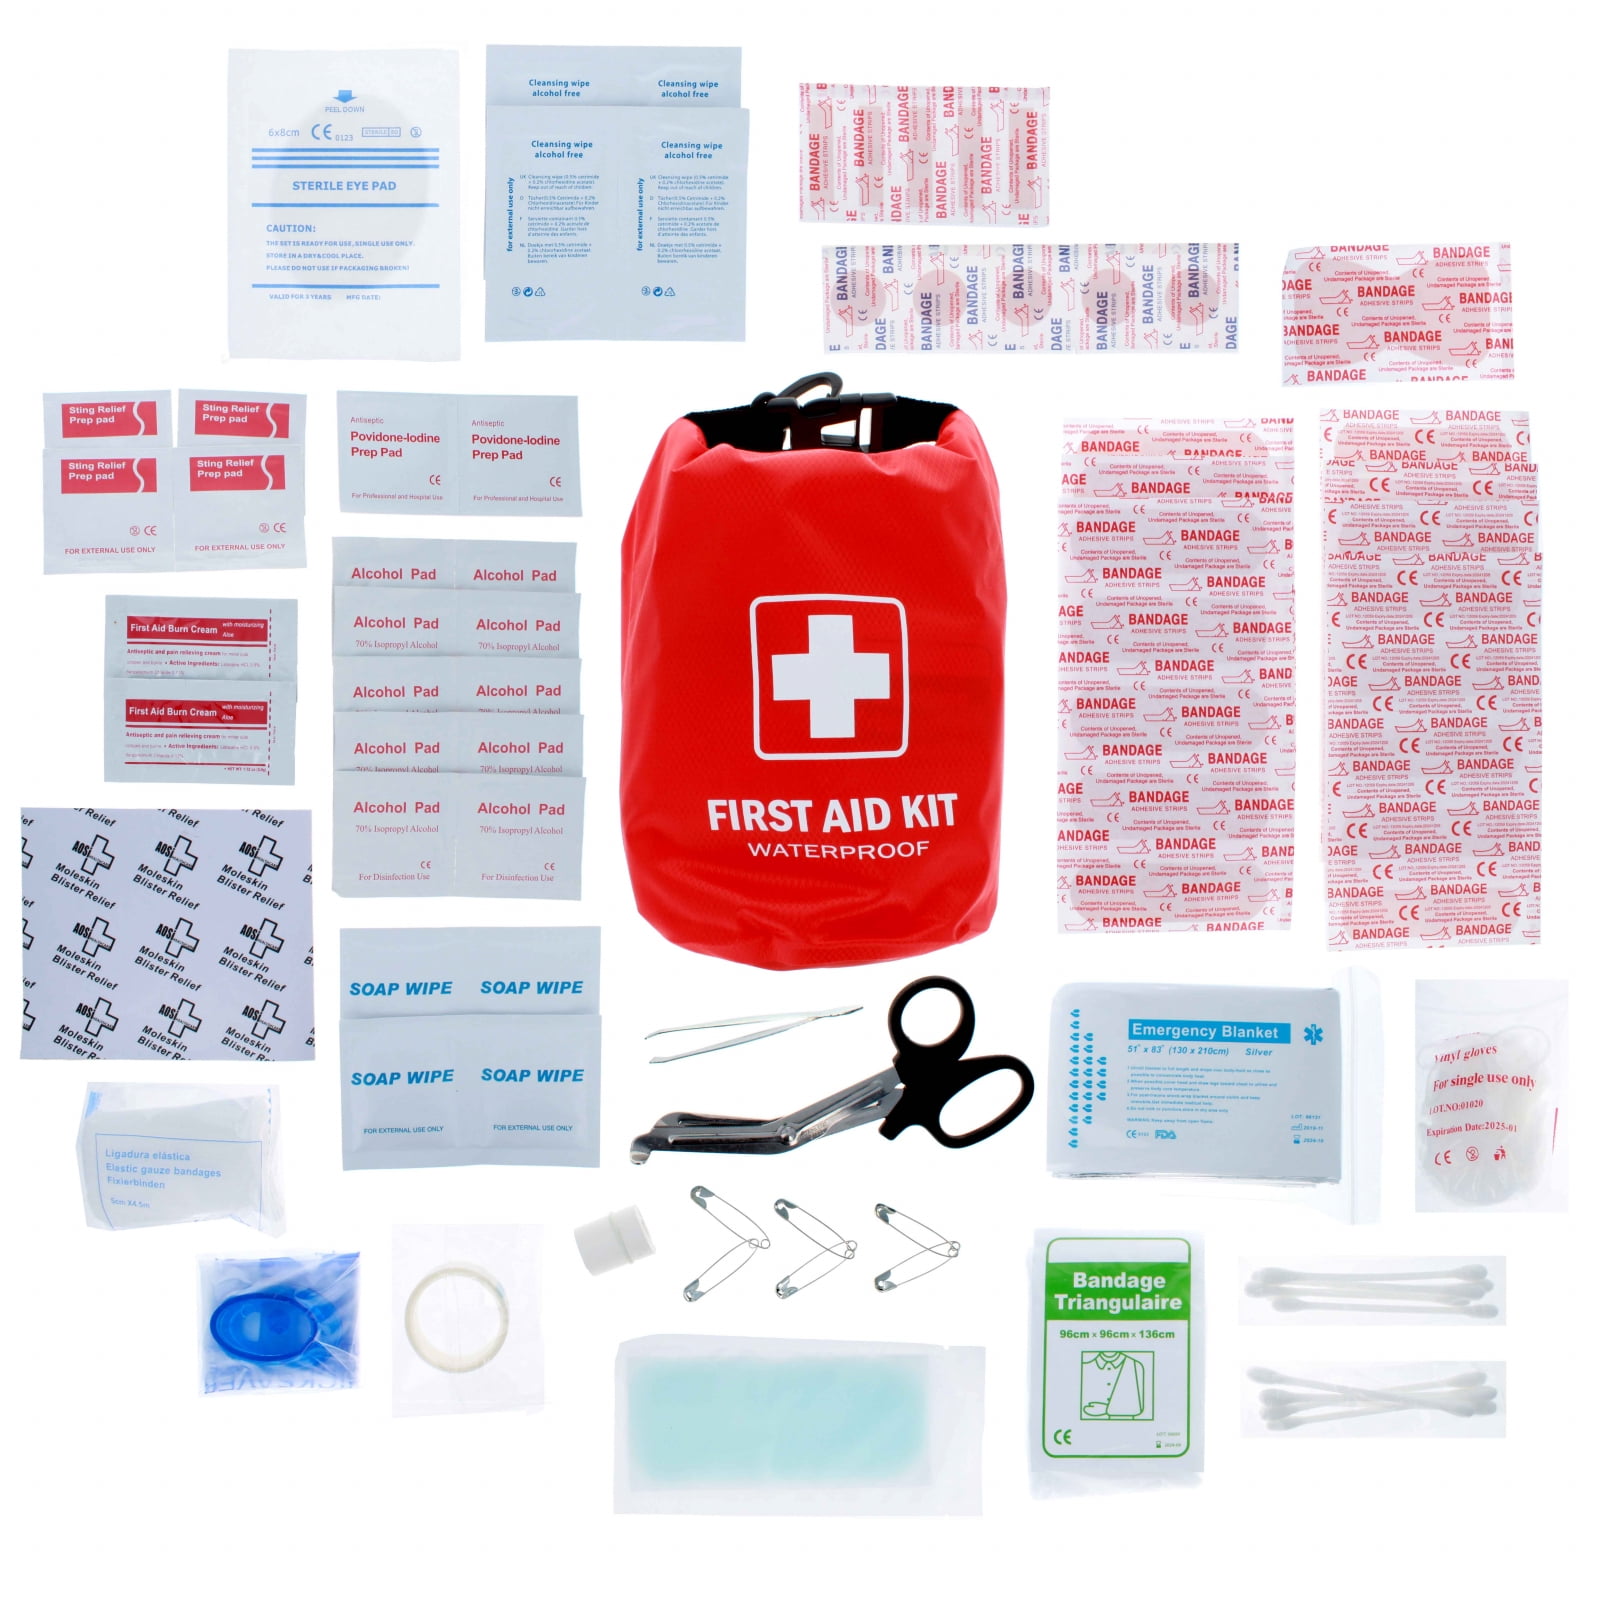 300 Cotton Tipped Applicators First Aid Kit Emergency Disaster Survival Camping 